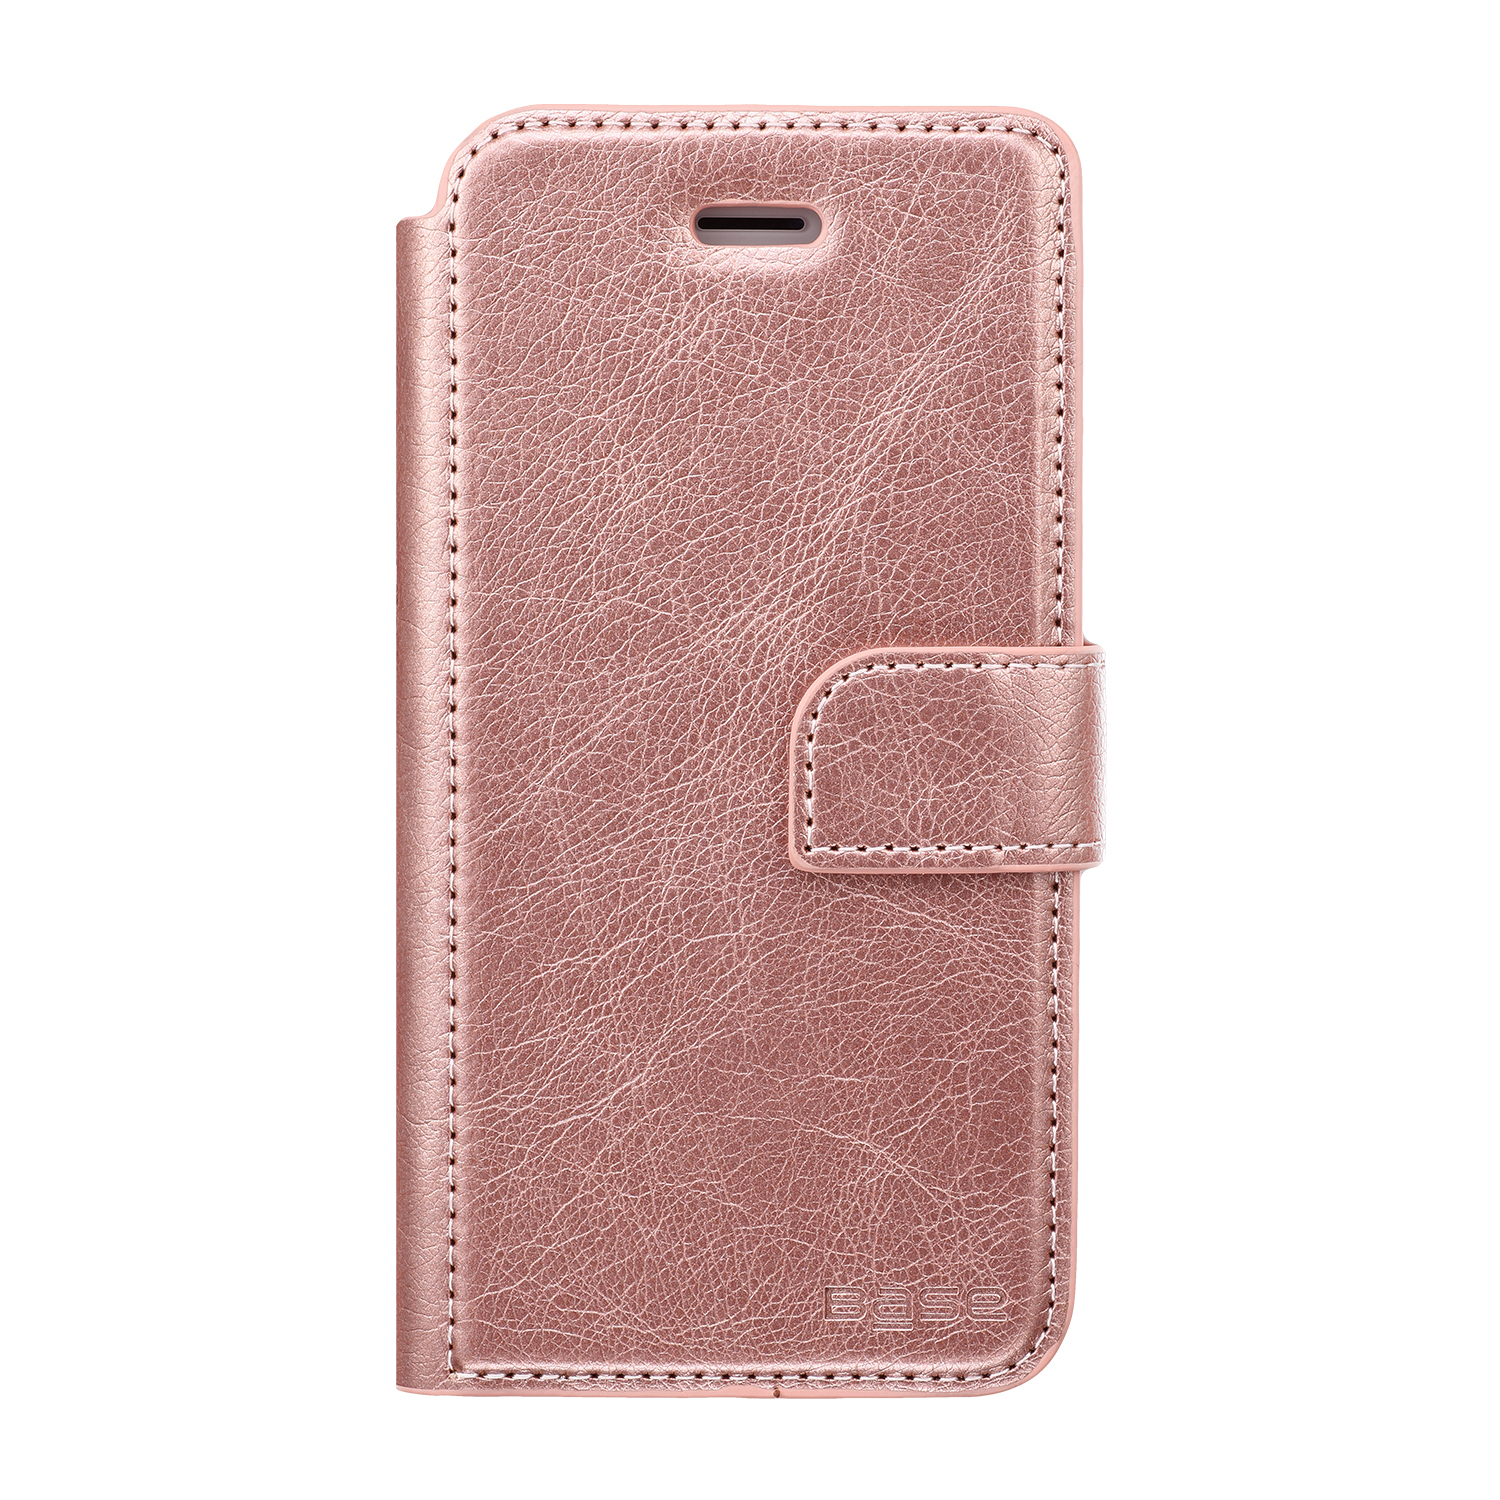 Rose wallet case protector for iPhone SE2 & SE3 - 7/8 cell phones